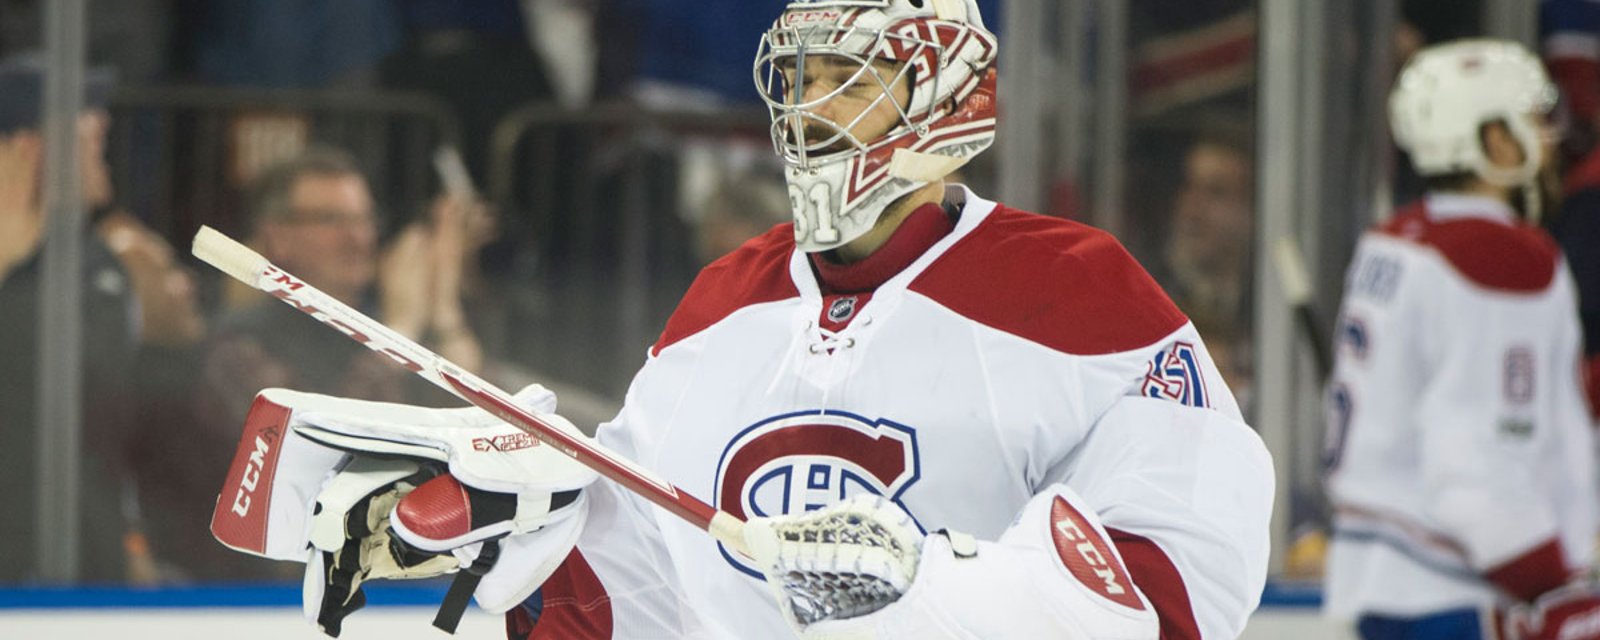 Price will be in net for the Habs Saturday